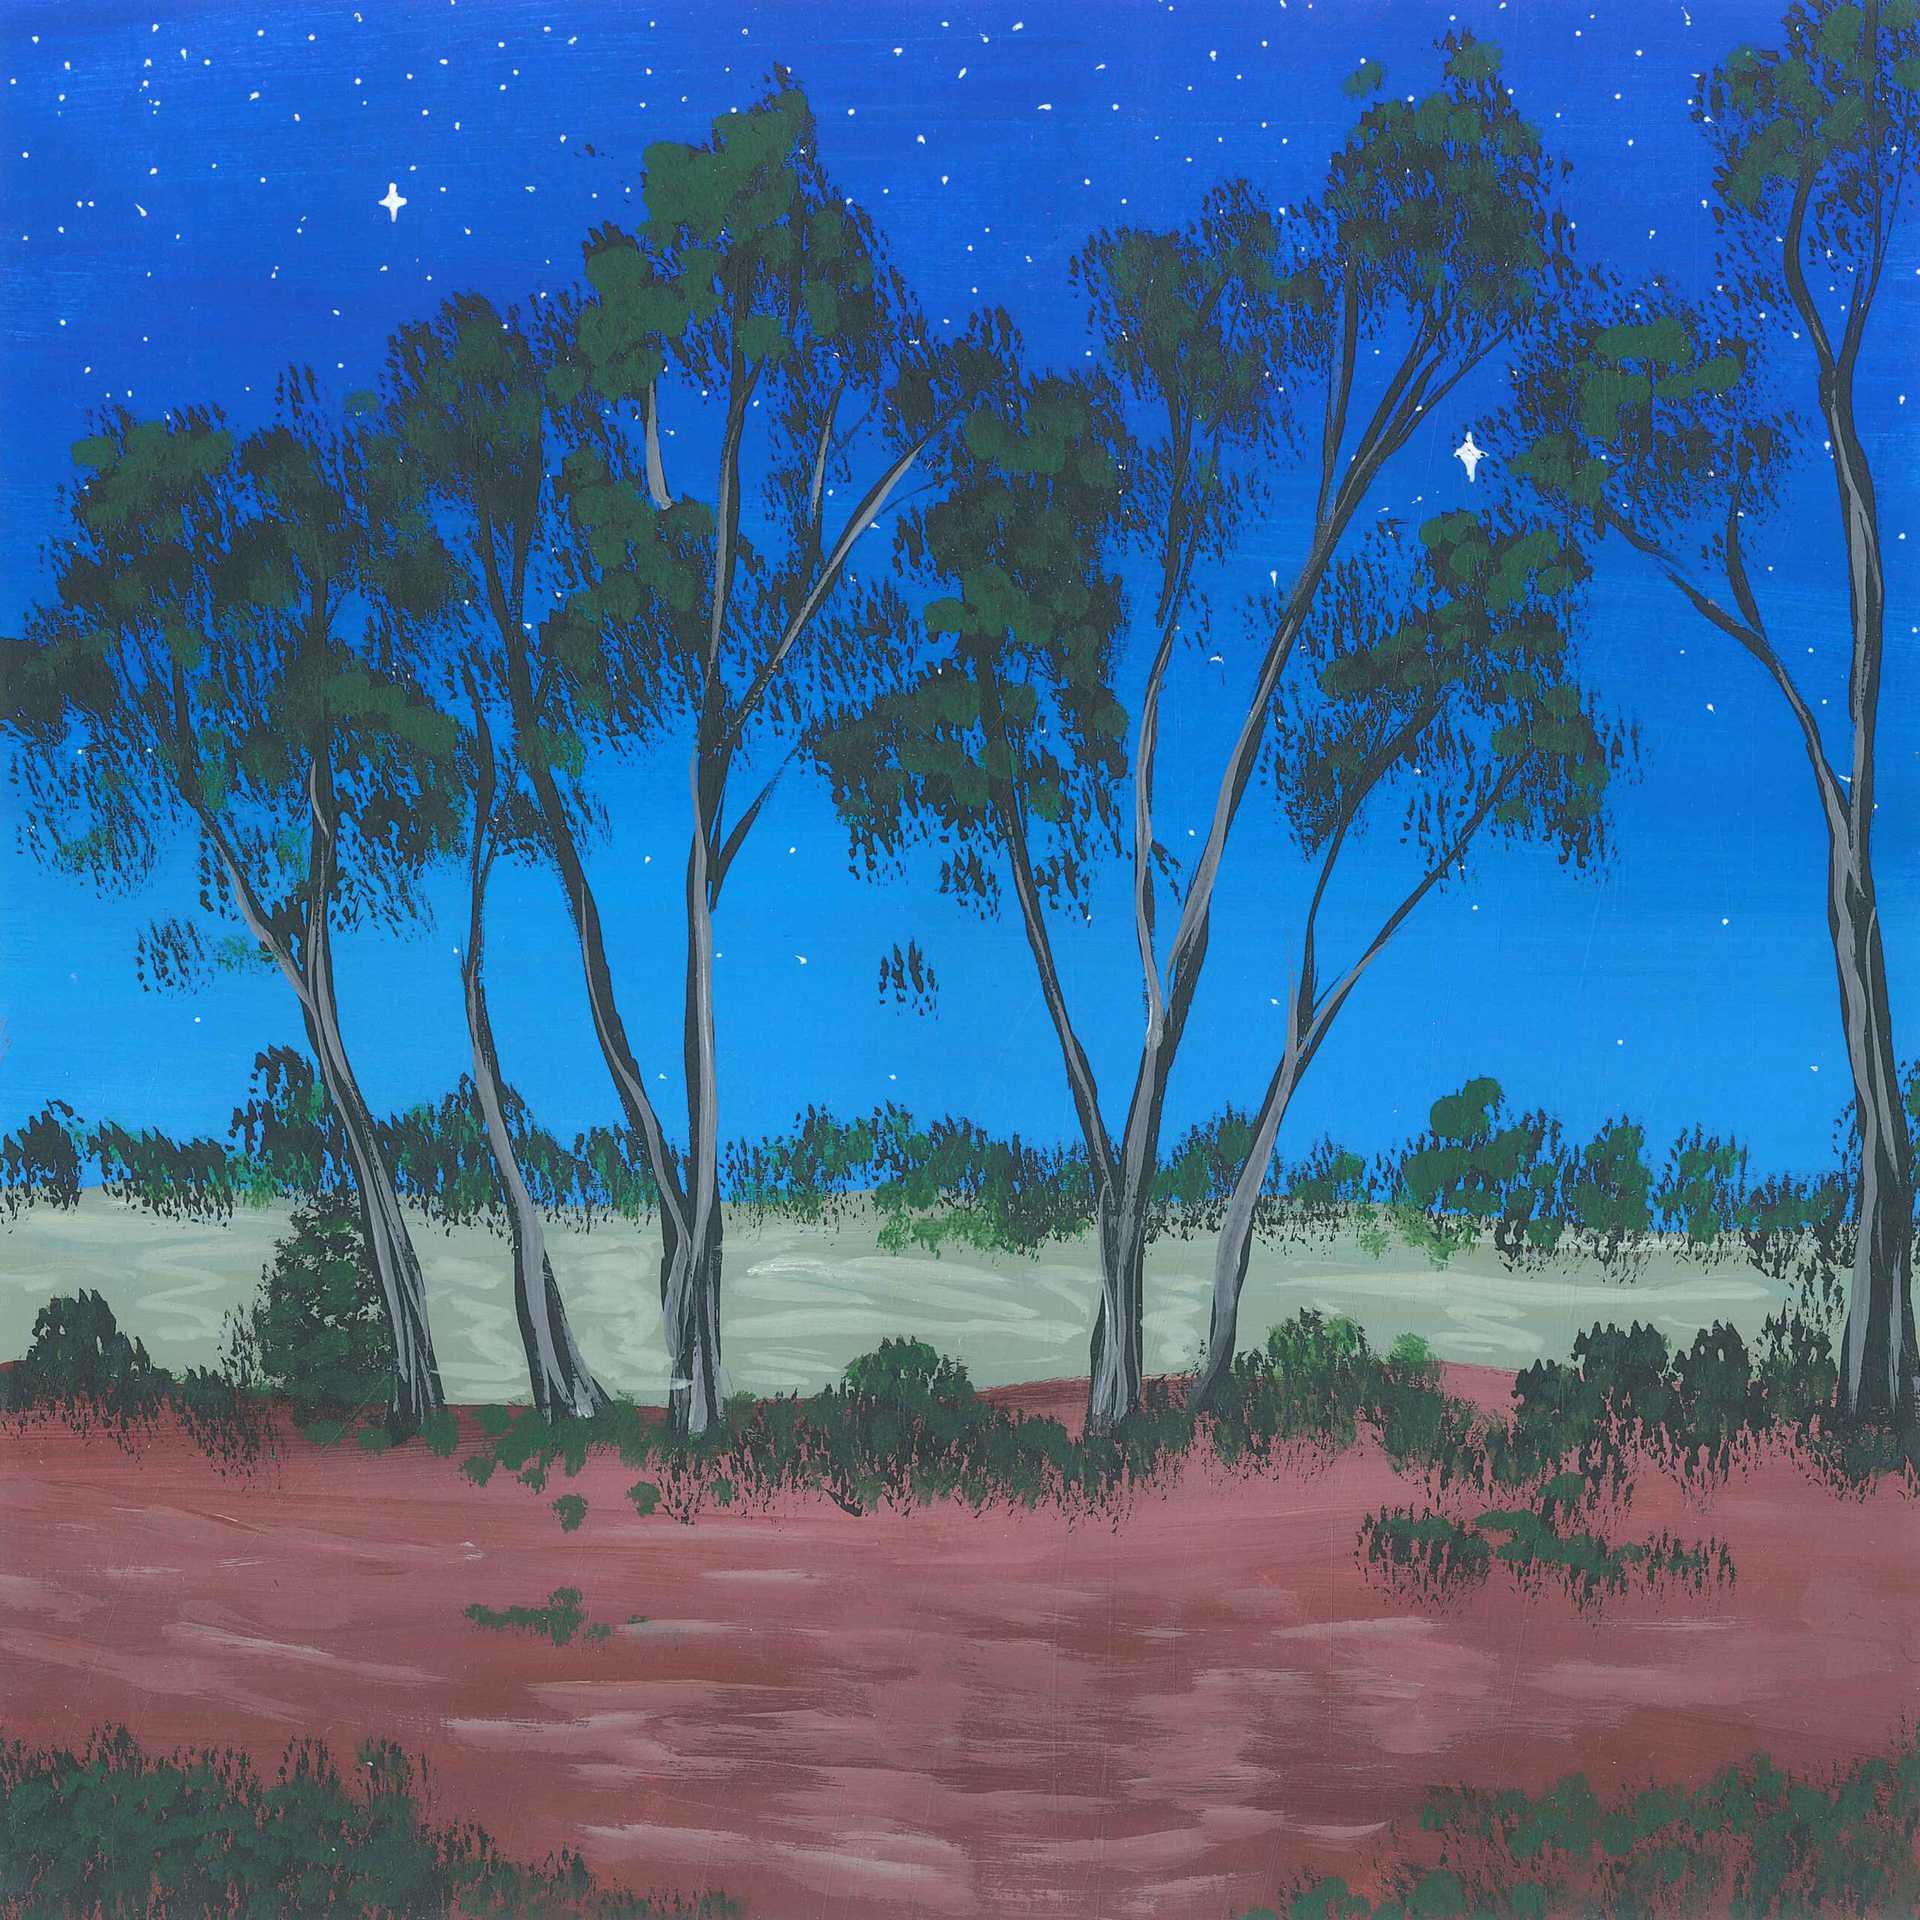 Riverine Forest by Night - nature landscape painting - earth.fm